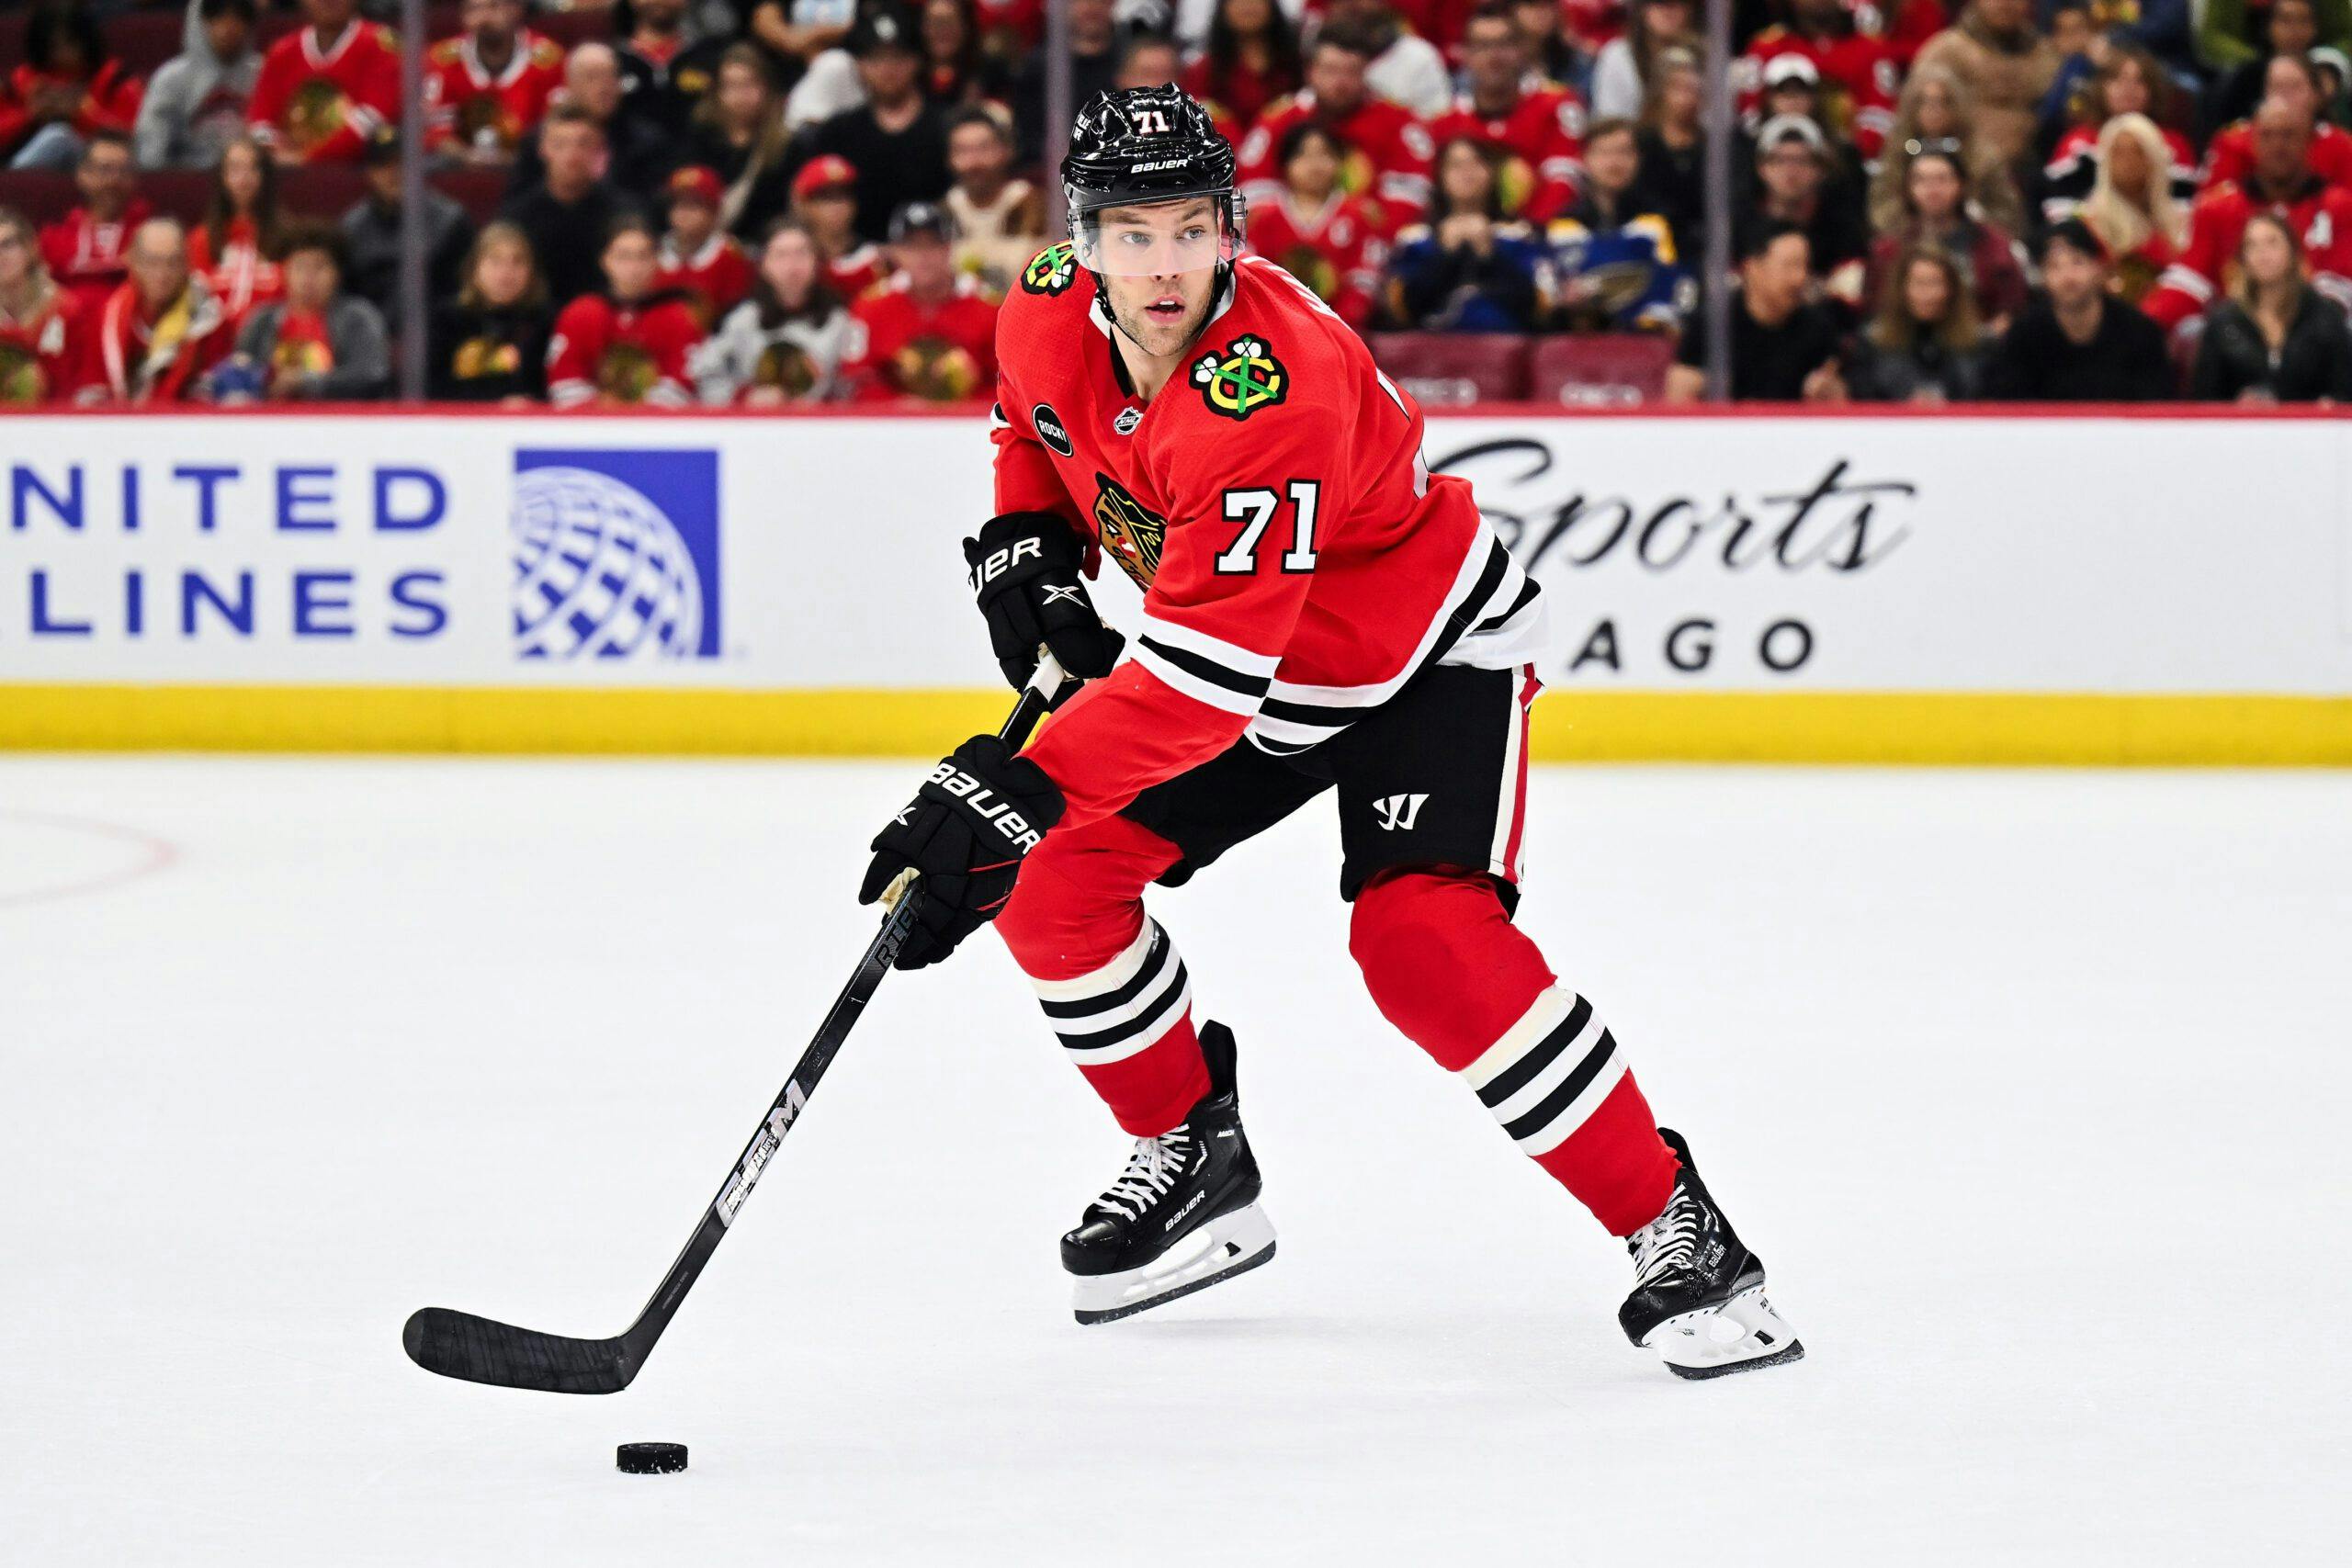 Chicago Blackhawks’ Taylor Hall out for season with knee injury